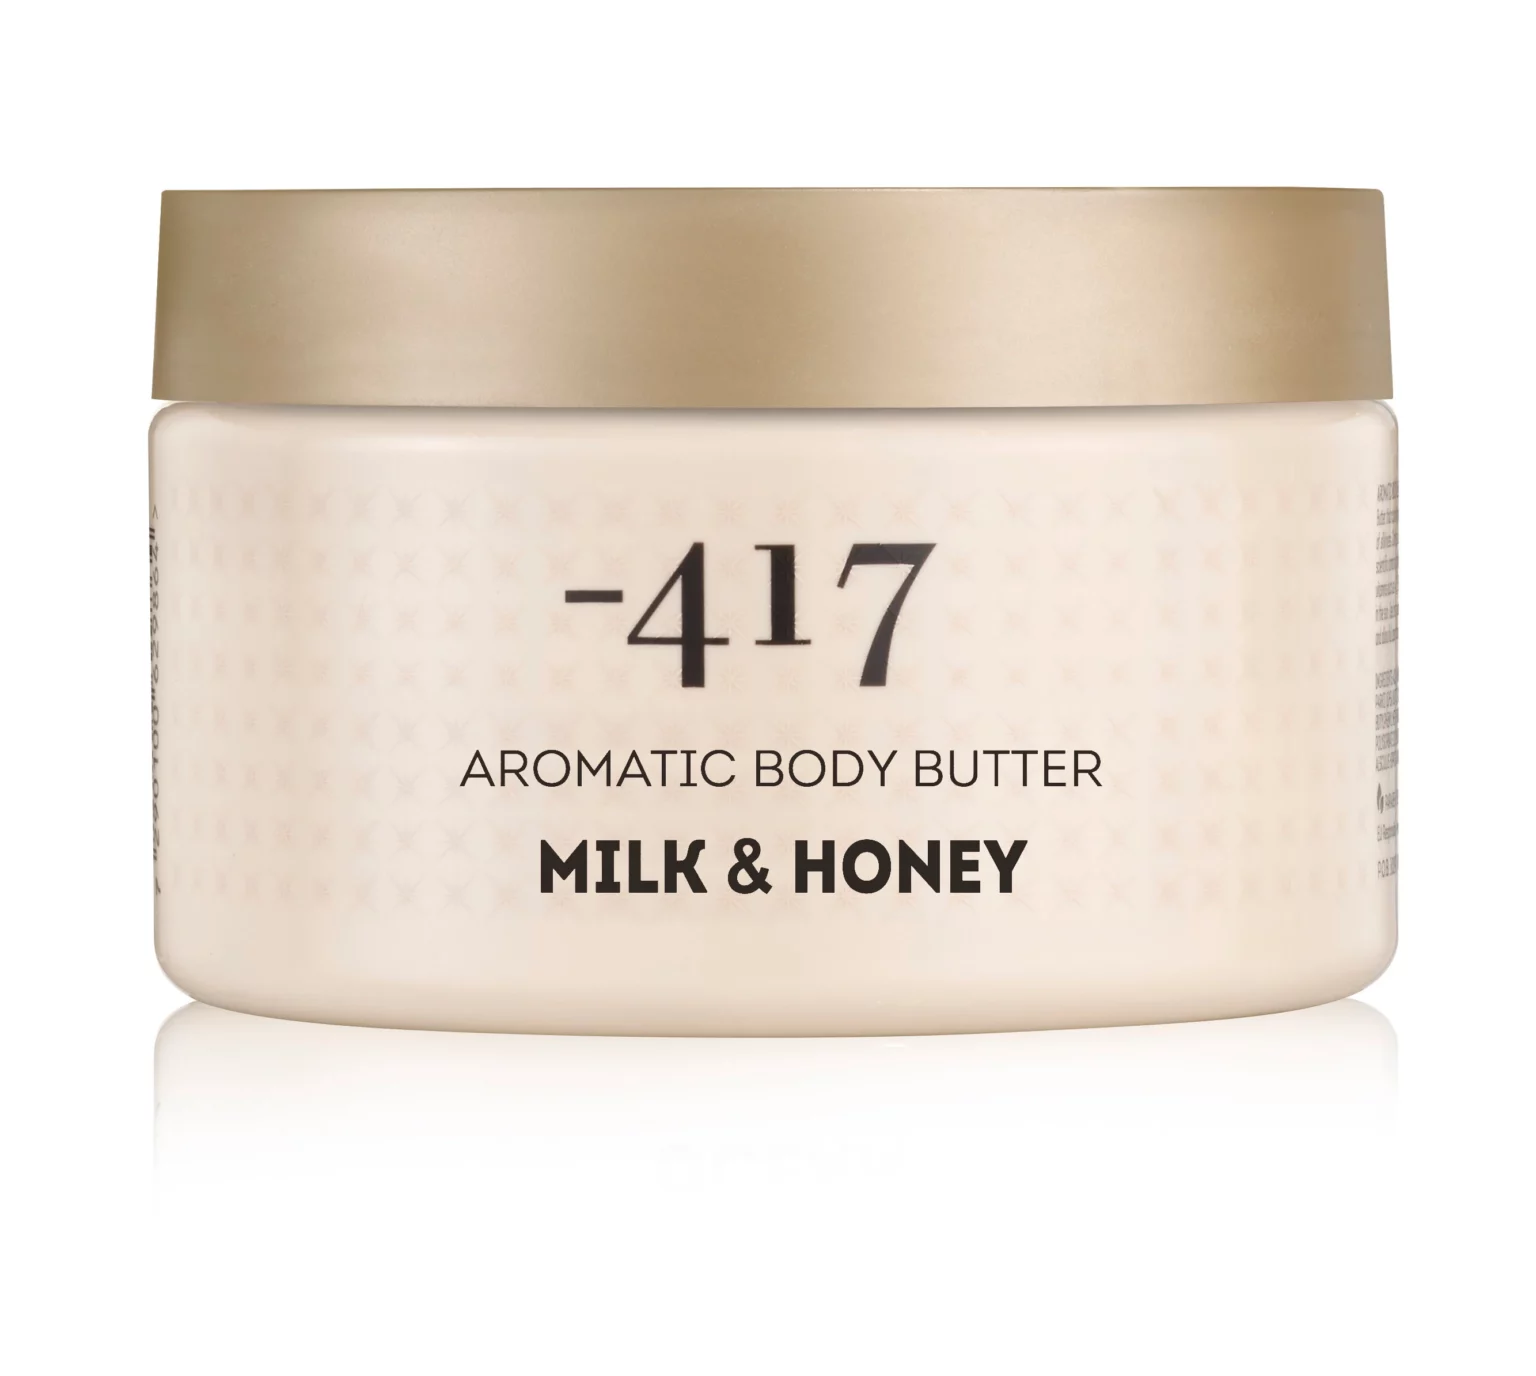 Aromatic Deep Nutrition Body Butter - Milk and Honey -417